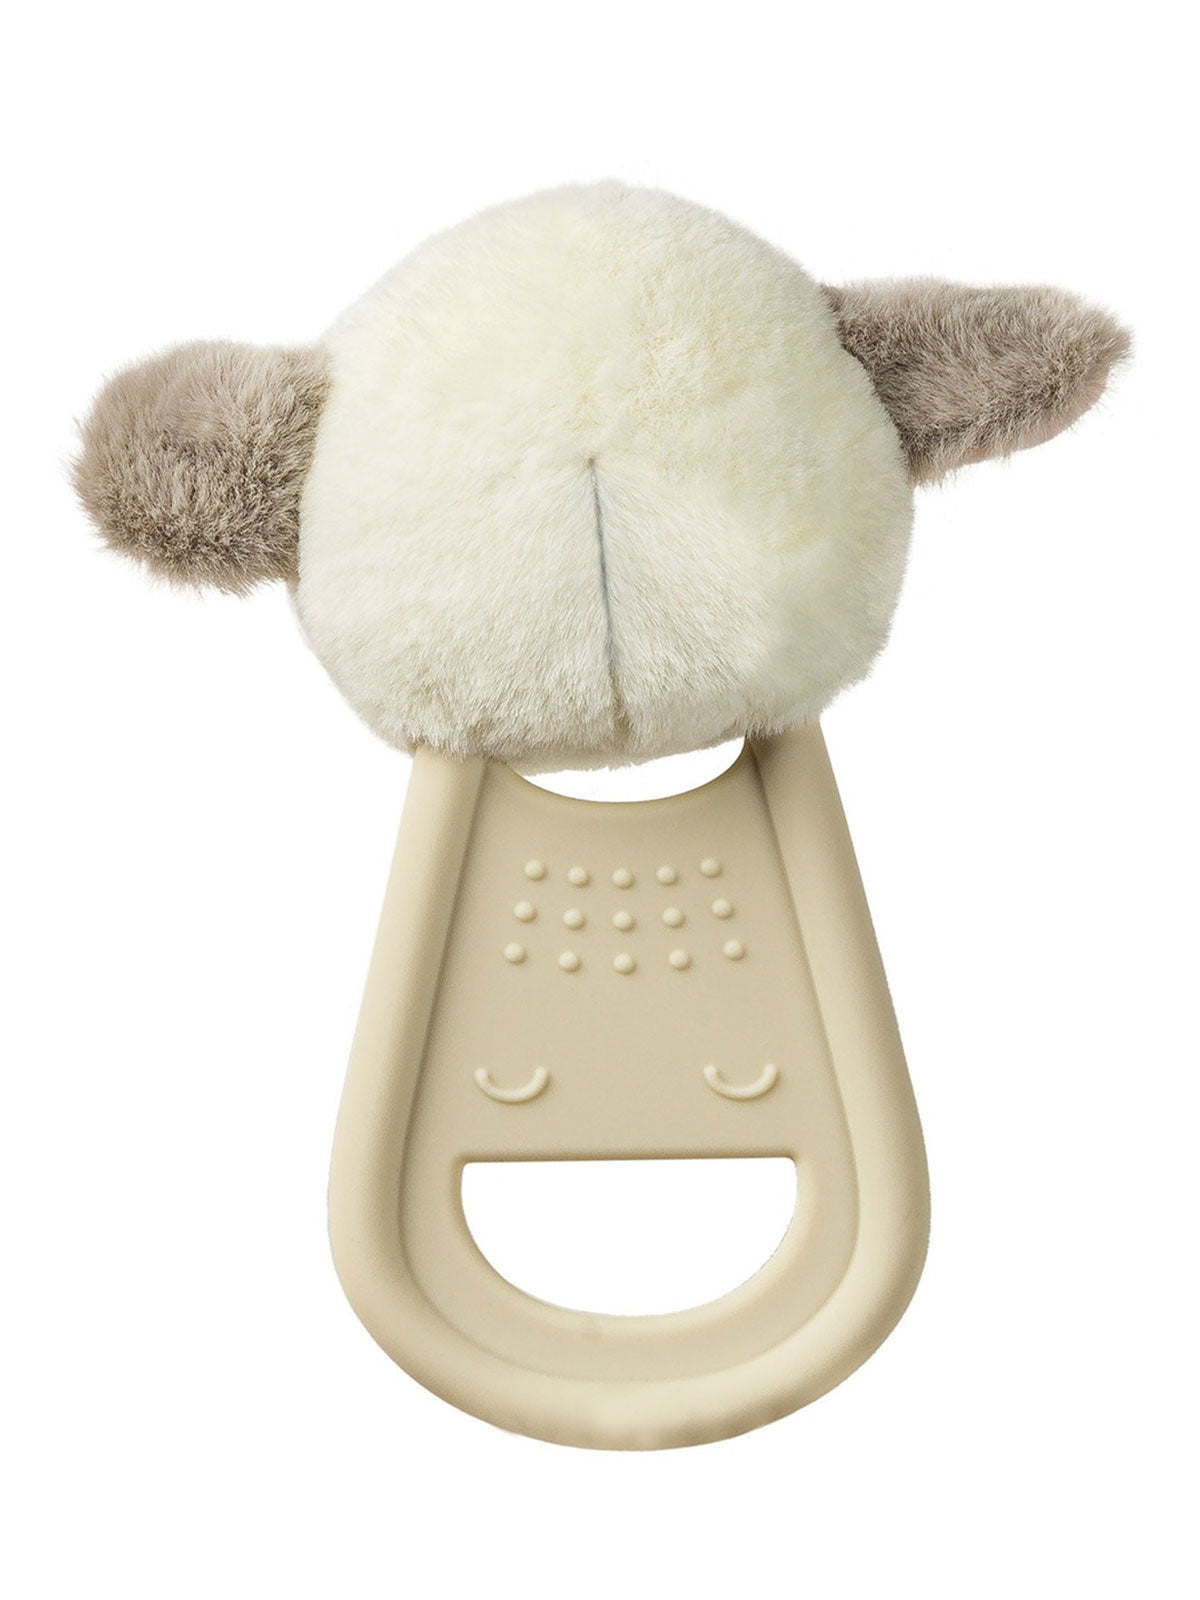 Simply Silicone Lamb Teether